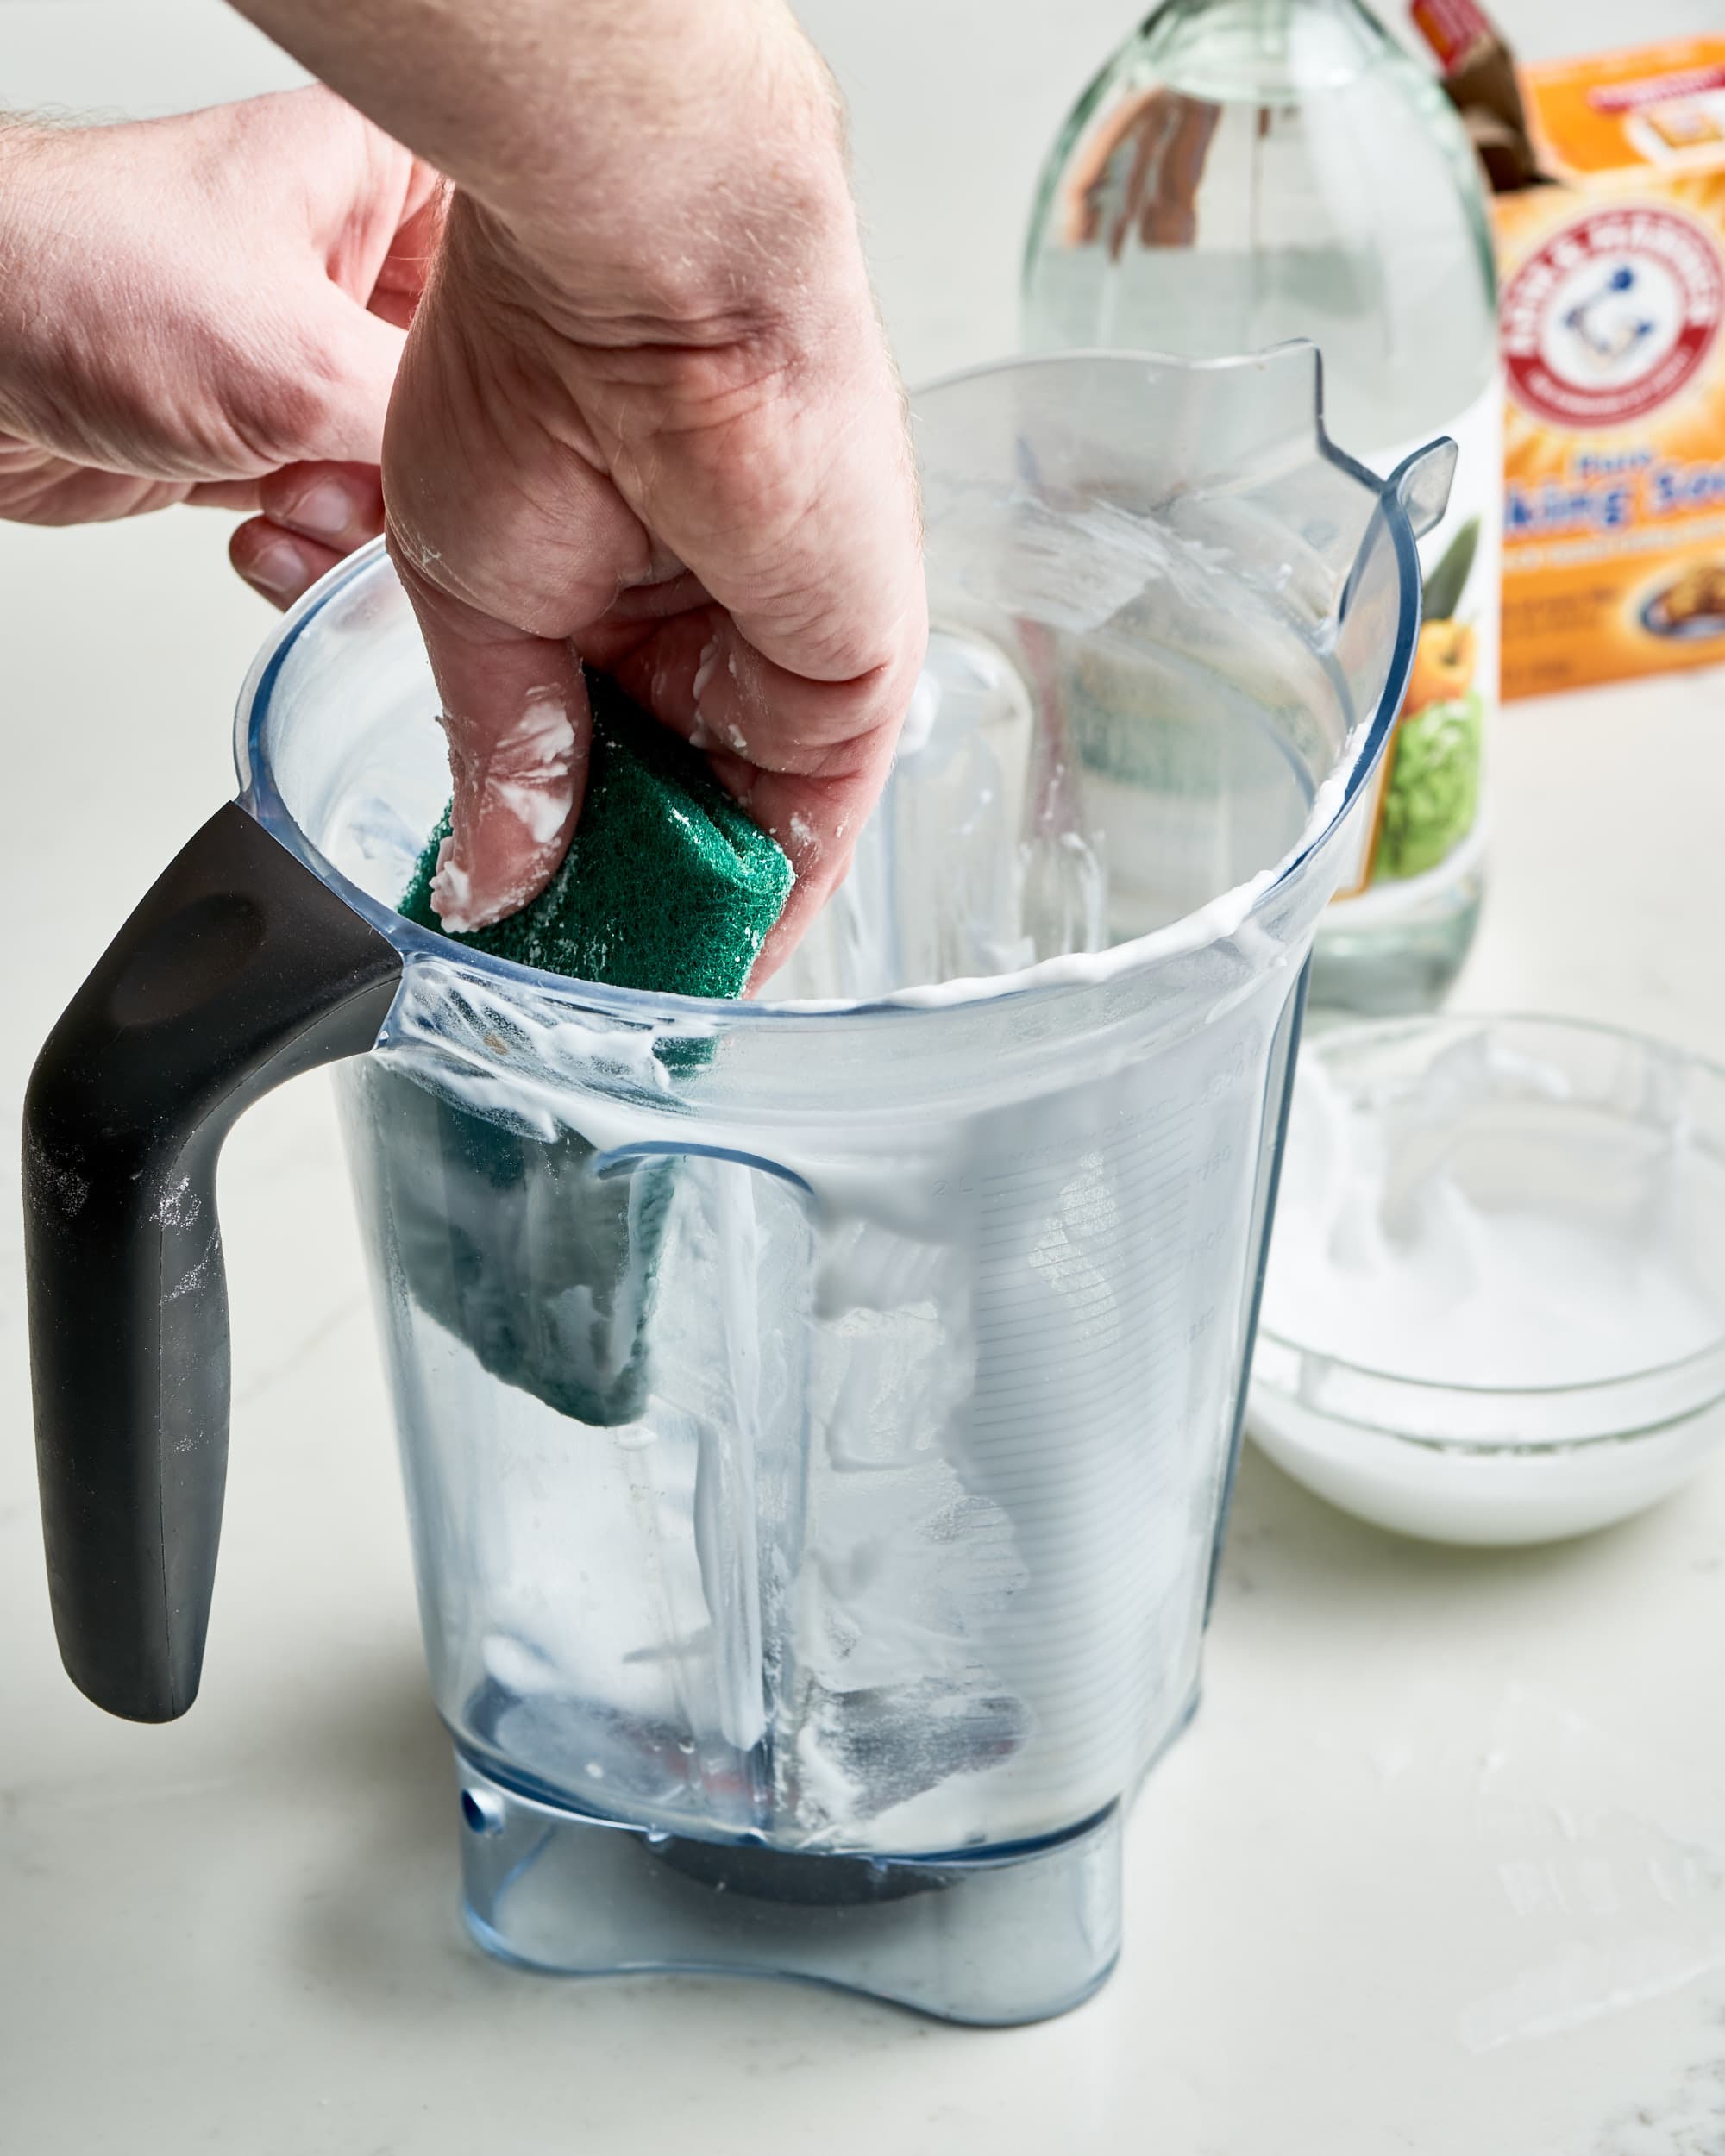 The Simple Hack To Clean A Foggy Blender Using Baking Soda And Vinegar